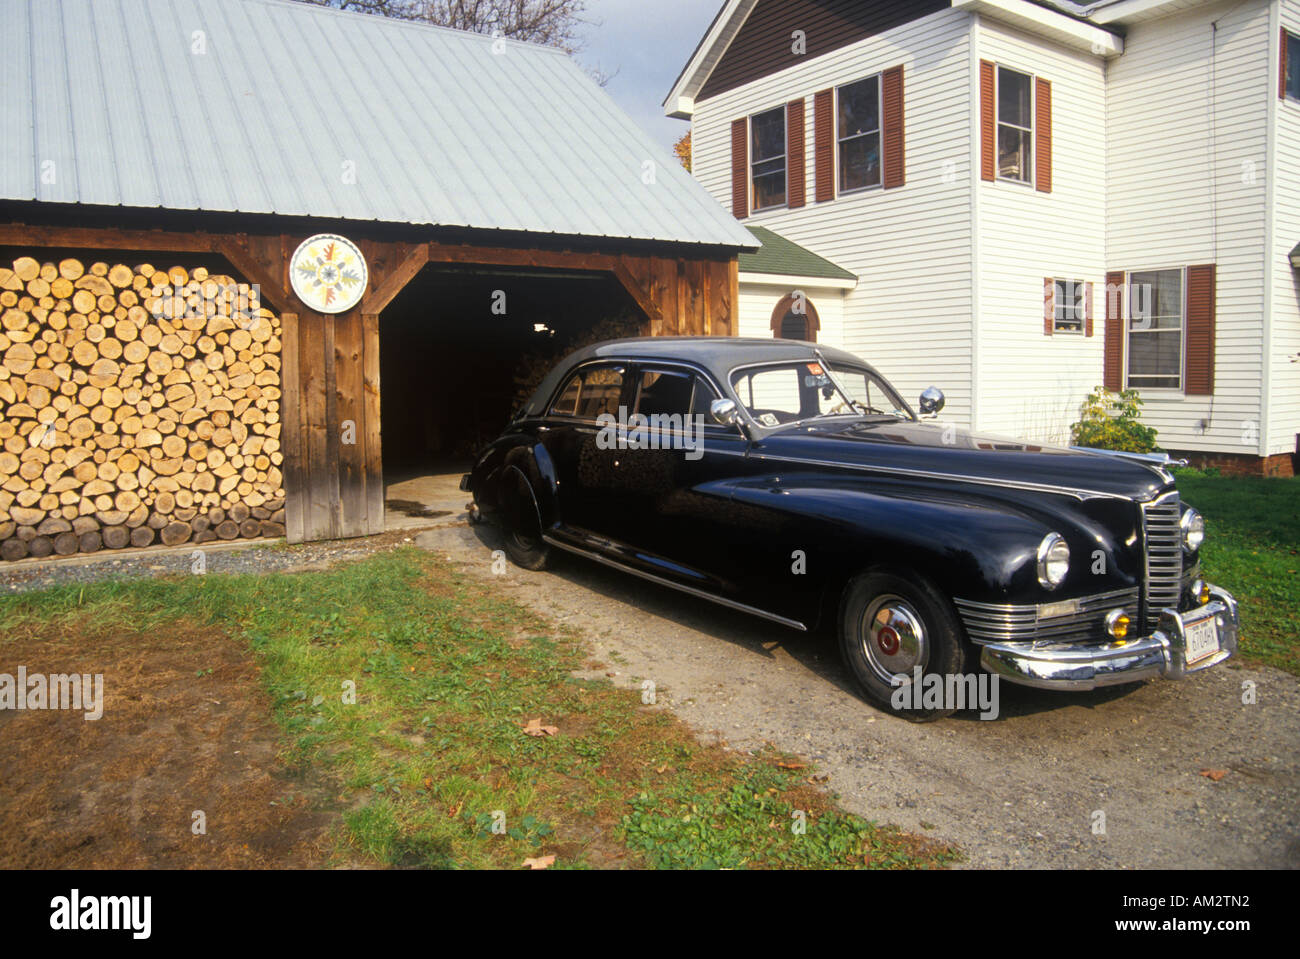 An antique car and stack of firewood in New England Stock Photo